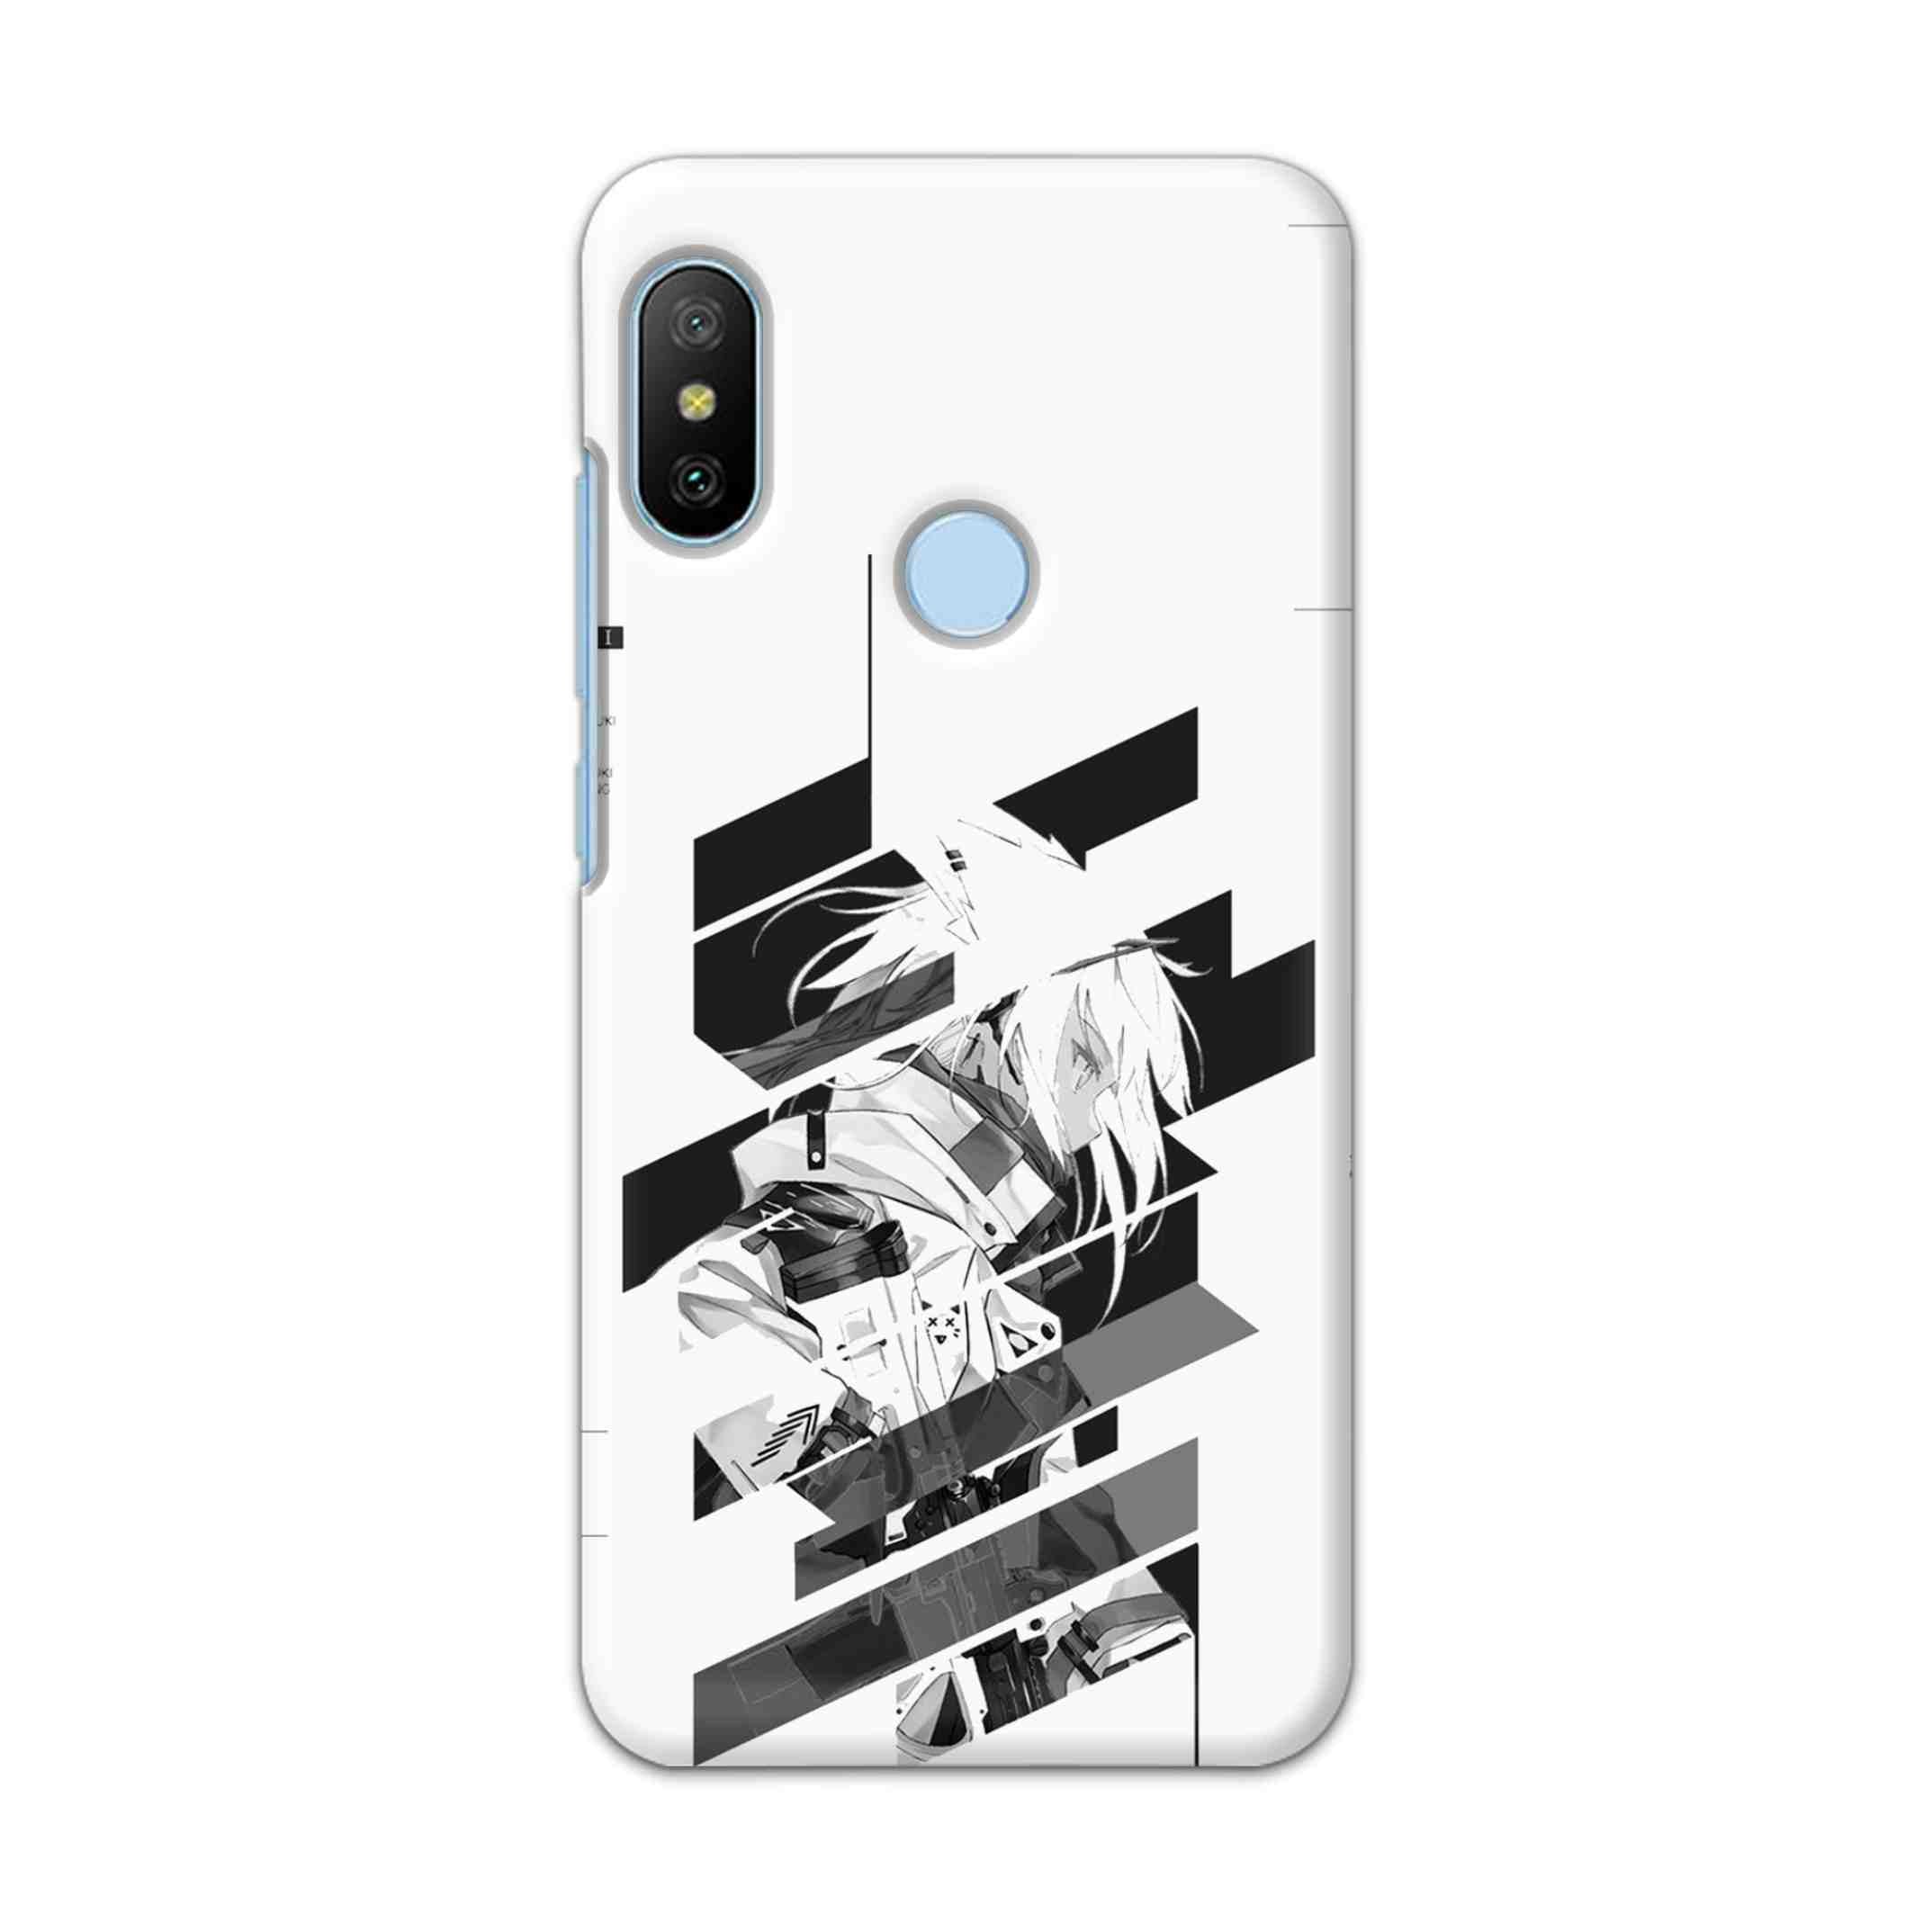 Buy Fubuki Hard Back Mobile Phone Case/Cover For Xiaomi A2 / 6X Online